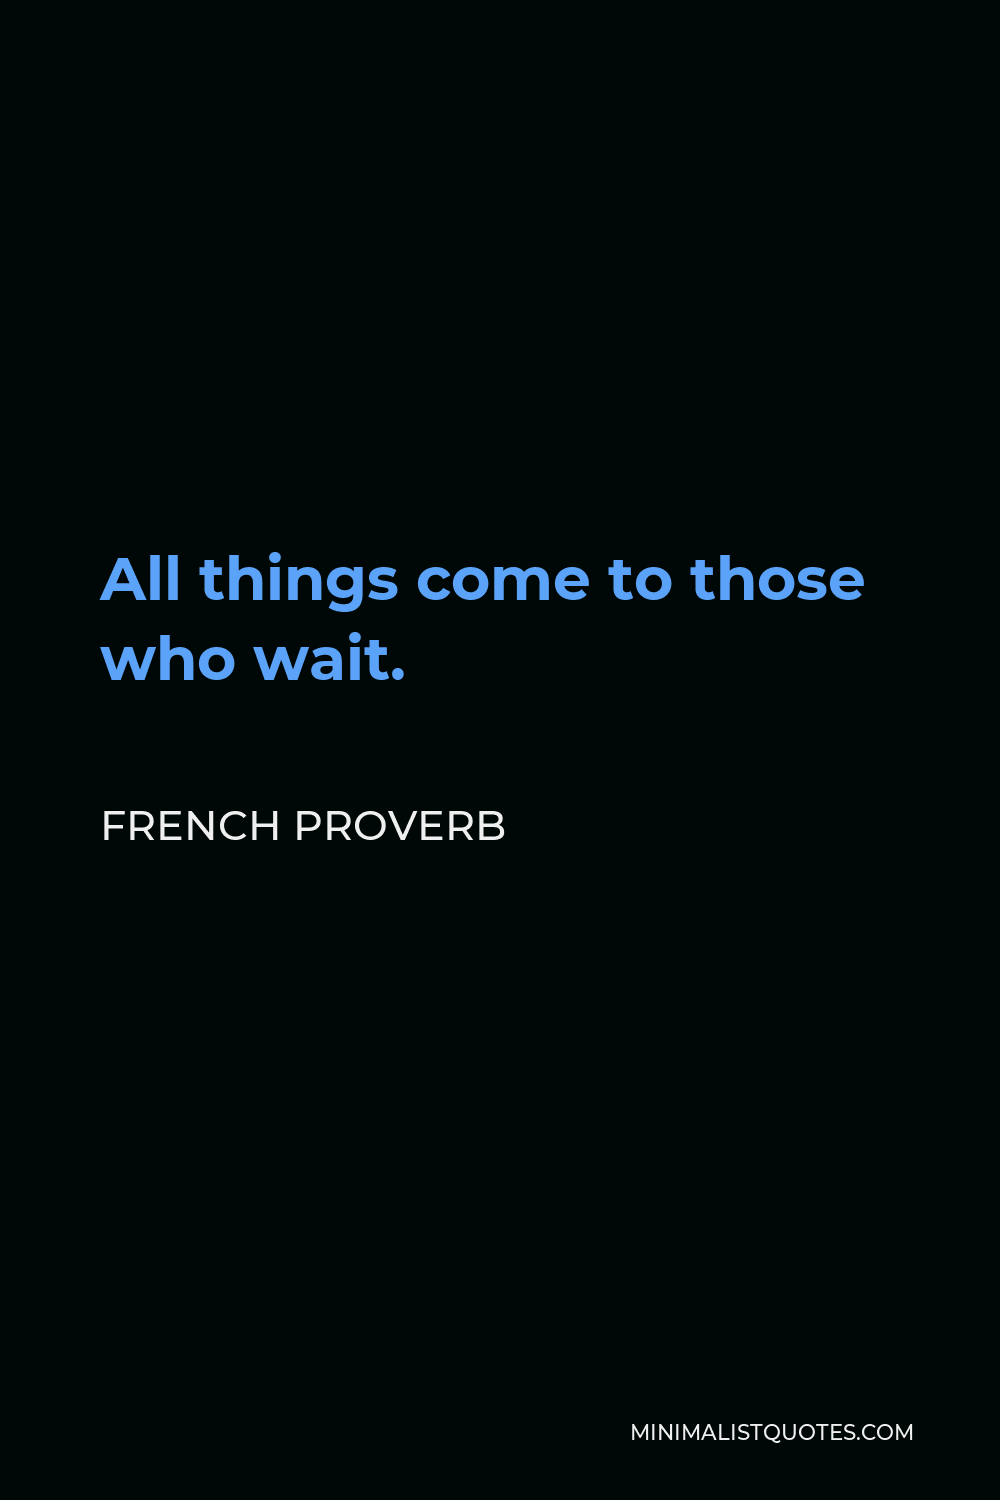 French Proverb Quote - All things come to those who wait.